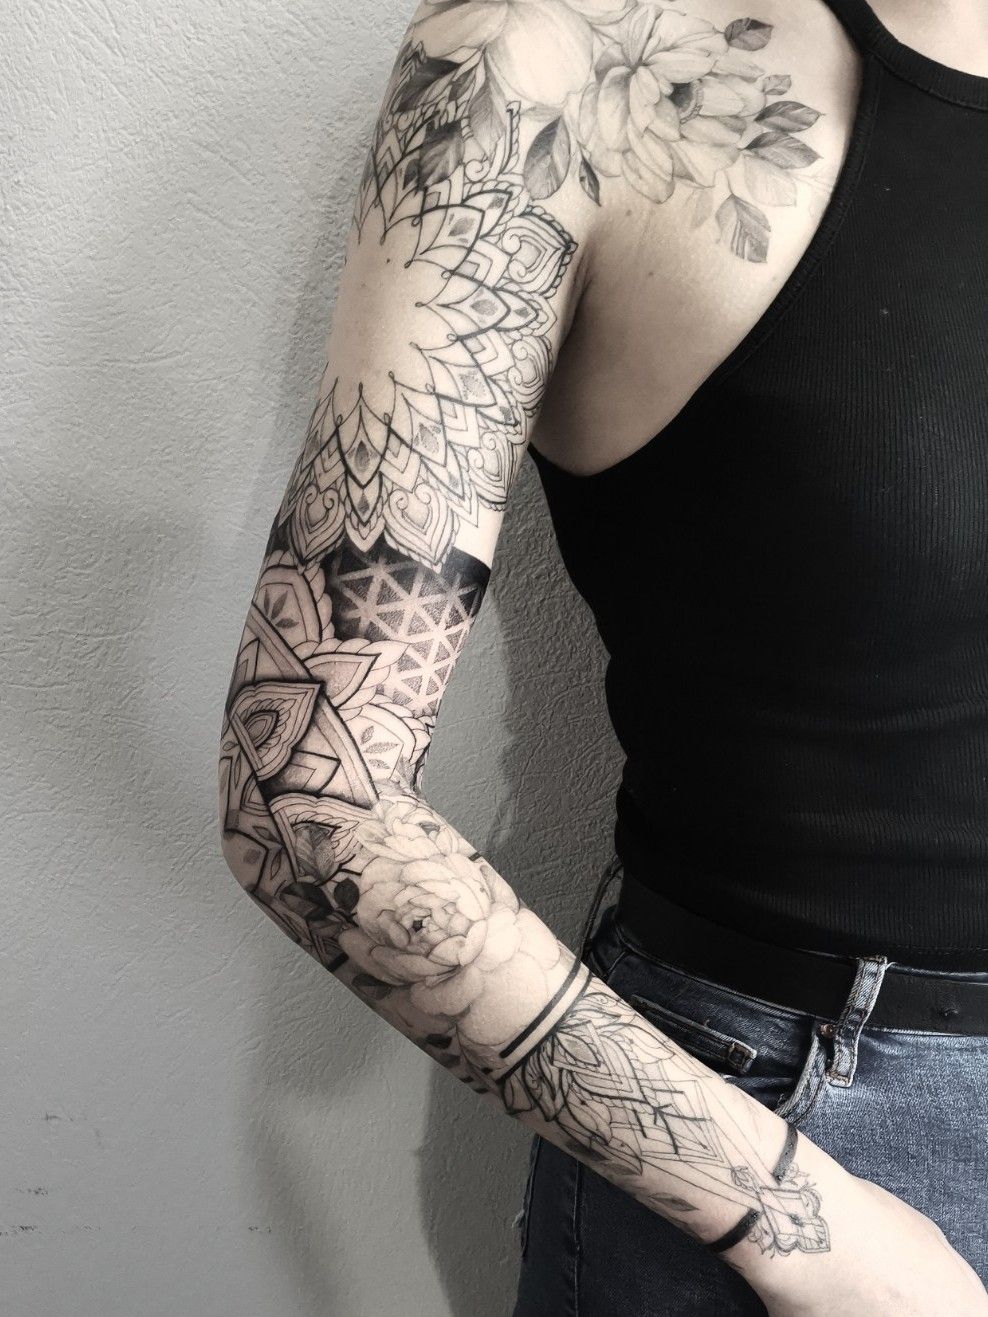 These Geometric Tattoos Redefine What Masculine Tattoos Mean